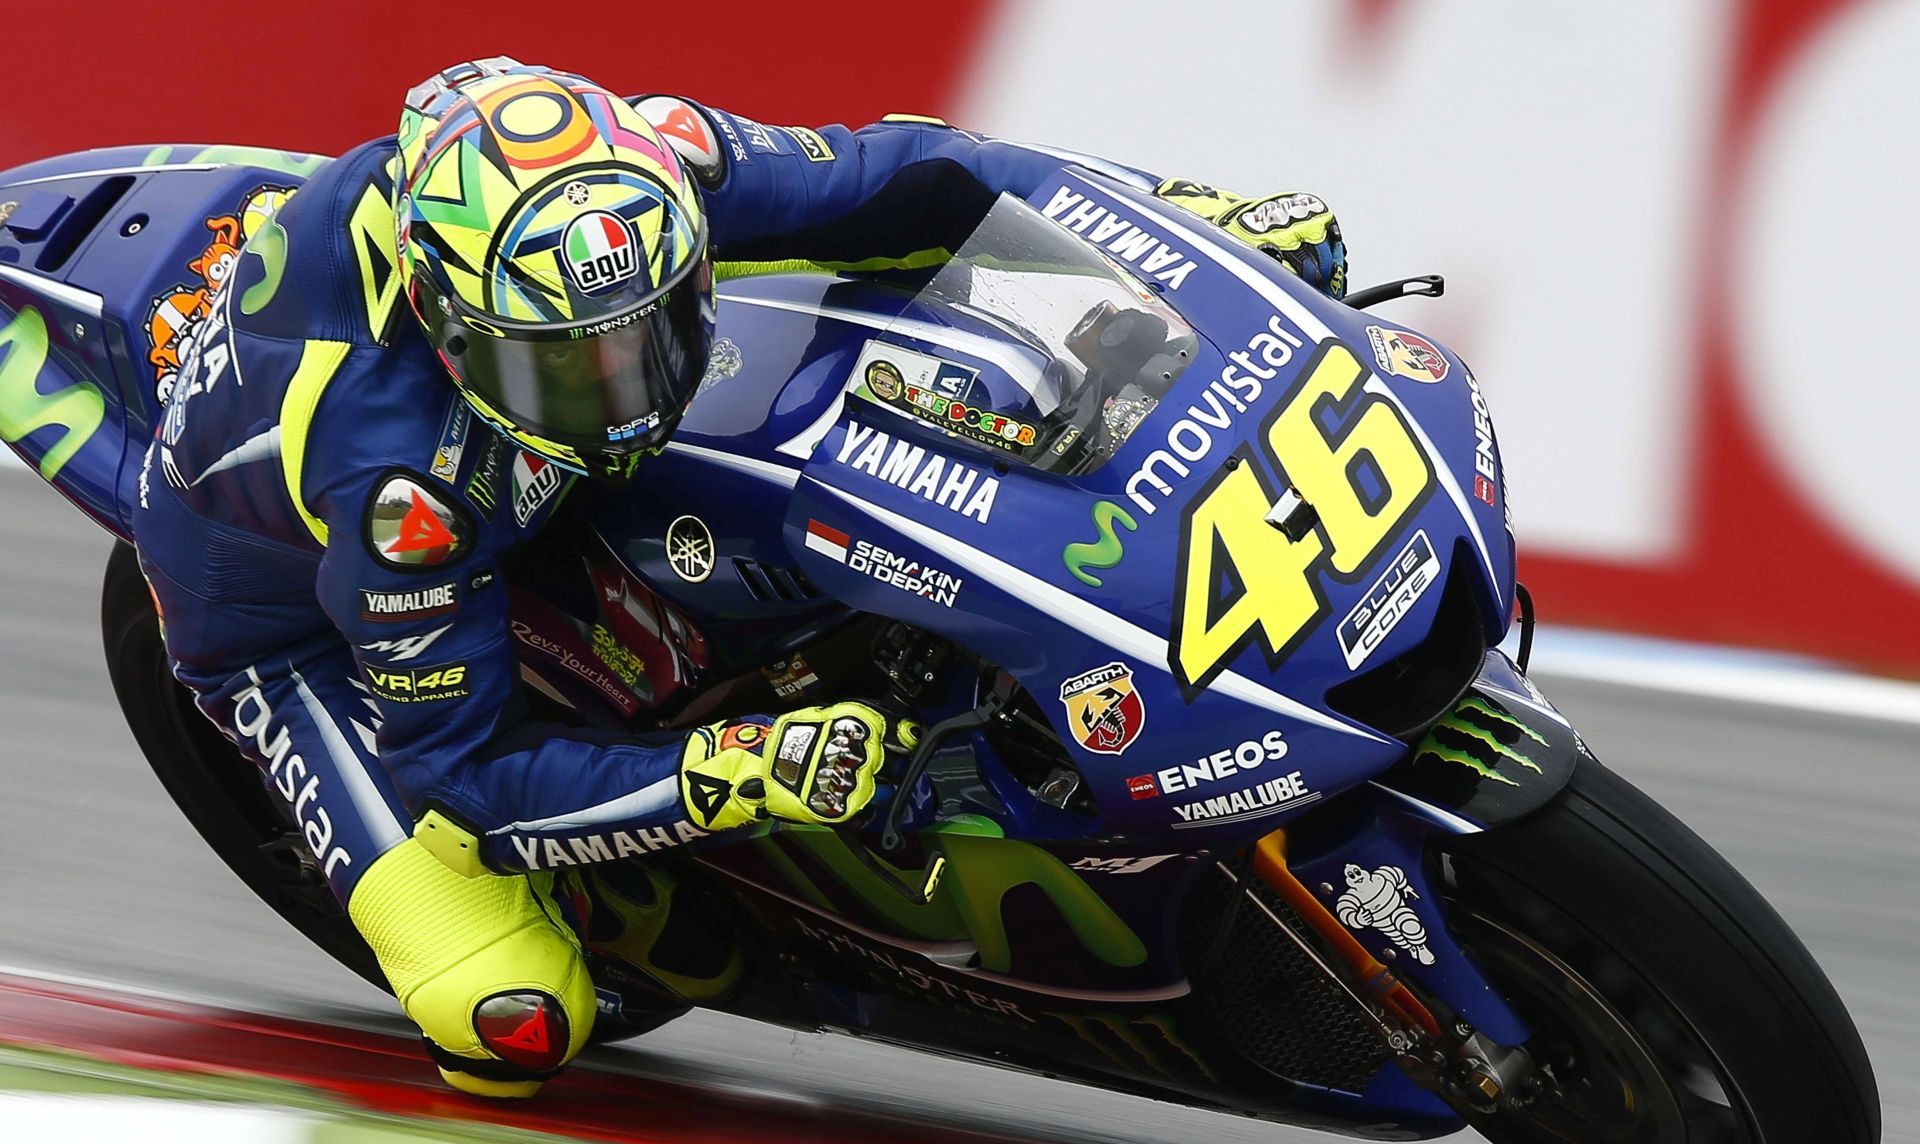 epa06047136 Valentino Rossi of Italy of Yamaha in action during a training session for the Motorcycling Grand Prix of Assen at TT circuit in Assen, The Netherlands, 24 June 2017.  EPA/VINCENT JANNINK